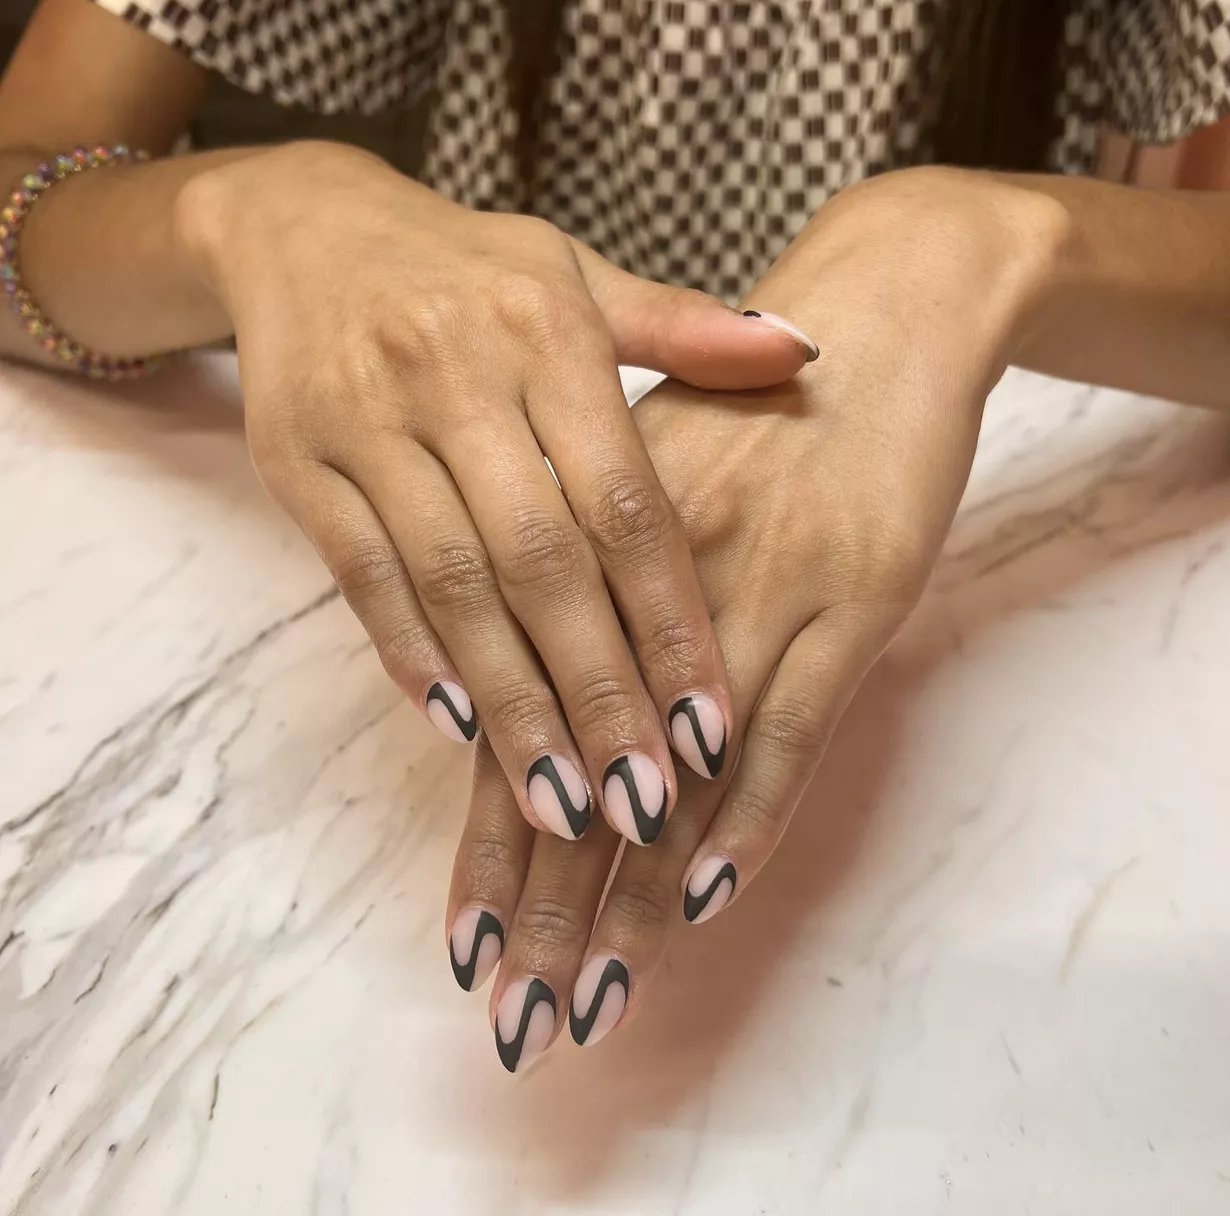 Manicured crossed hands with dip powder nails in geometric op-art pattern